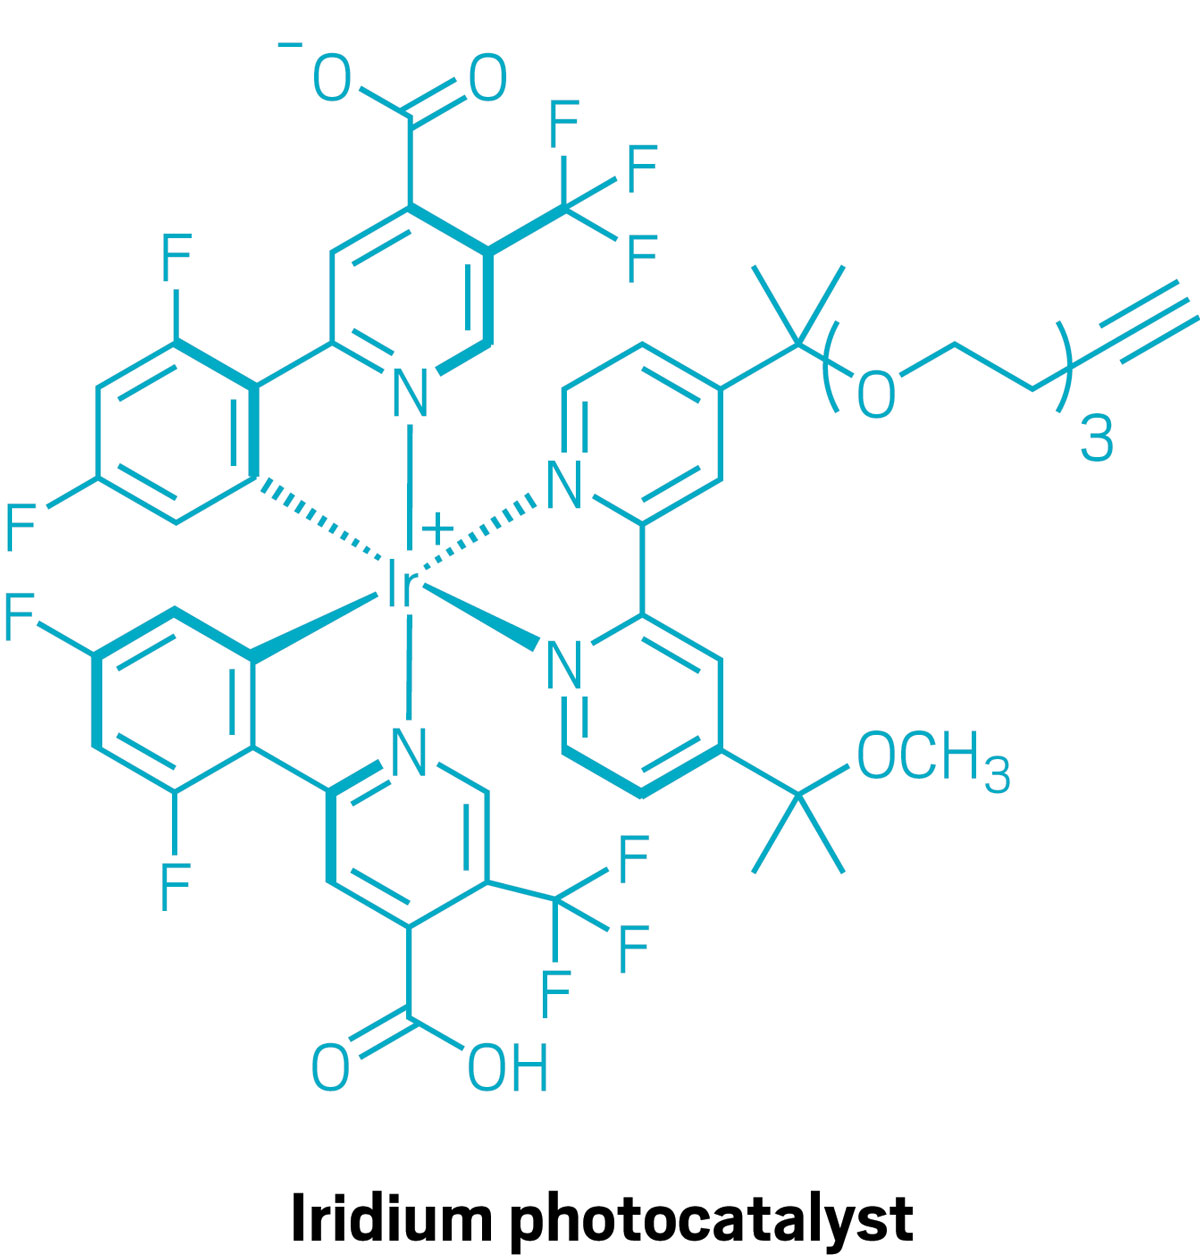 A structure of the iridium photocatalyst used in MicroMapping, a technique for mapping protein-protein interactions.